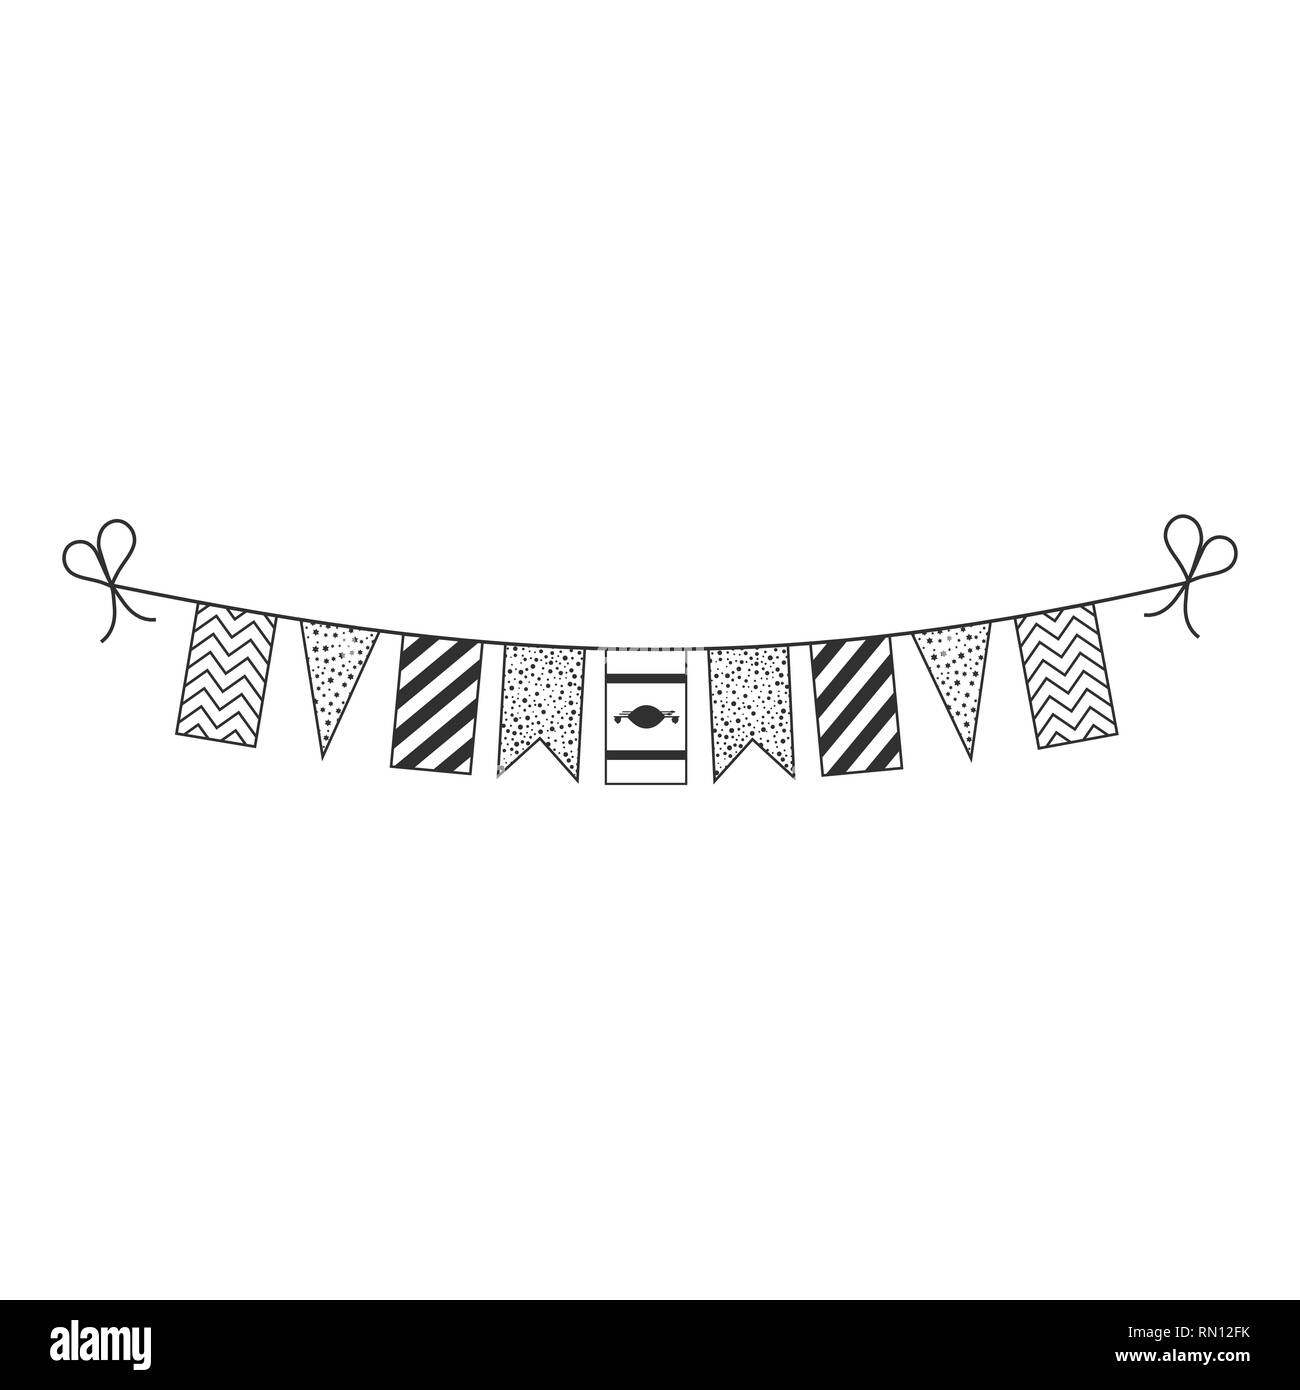 Decorations bunting flags for Swaziland national day holiday in black outline flat design. Independence day or National day holiday concept. Stock Vector